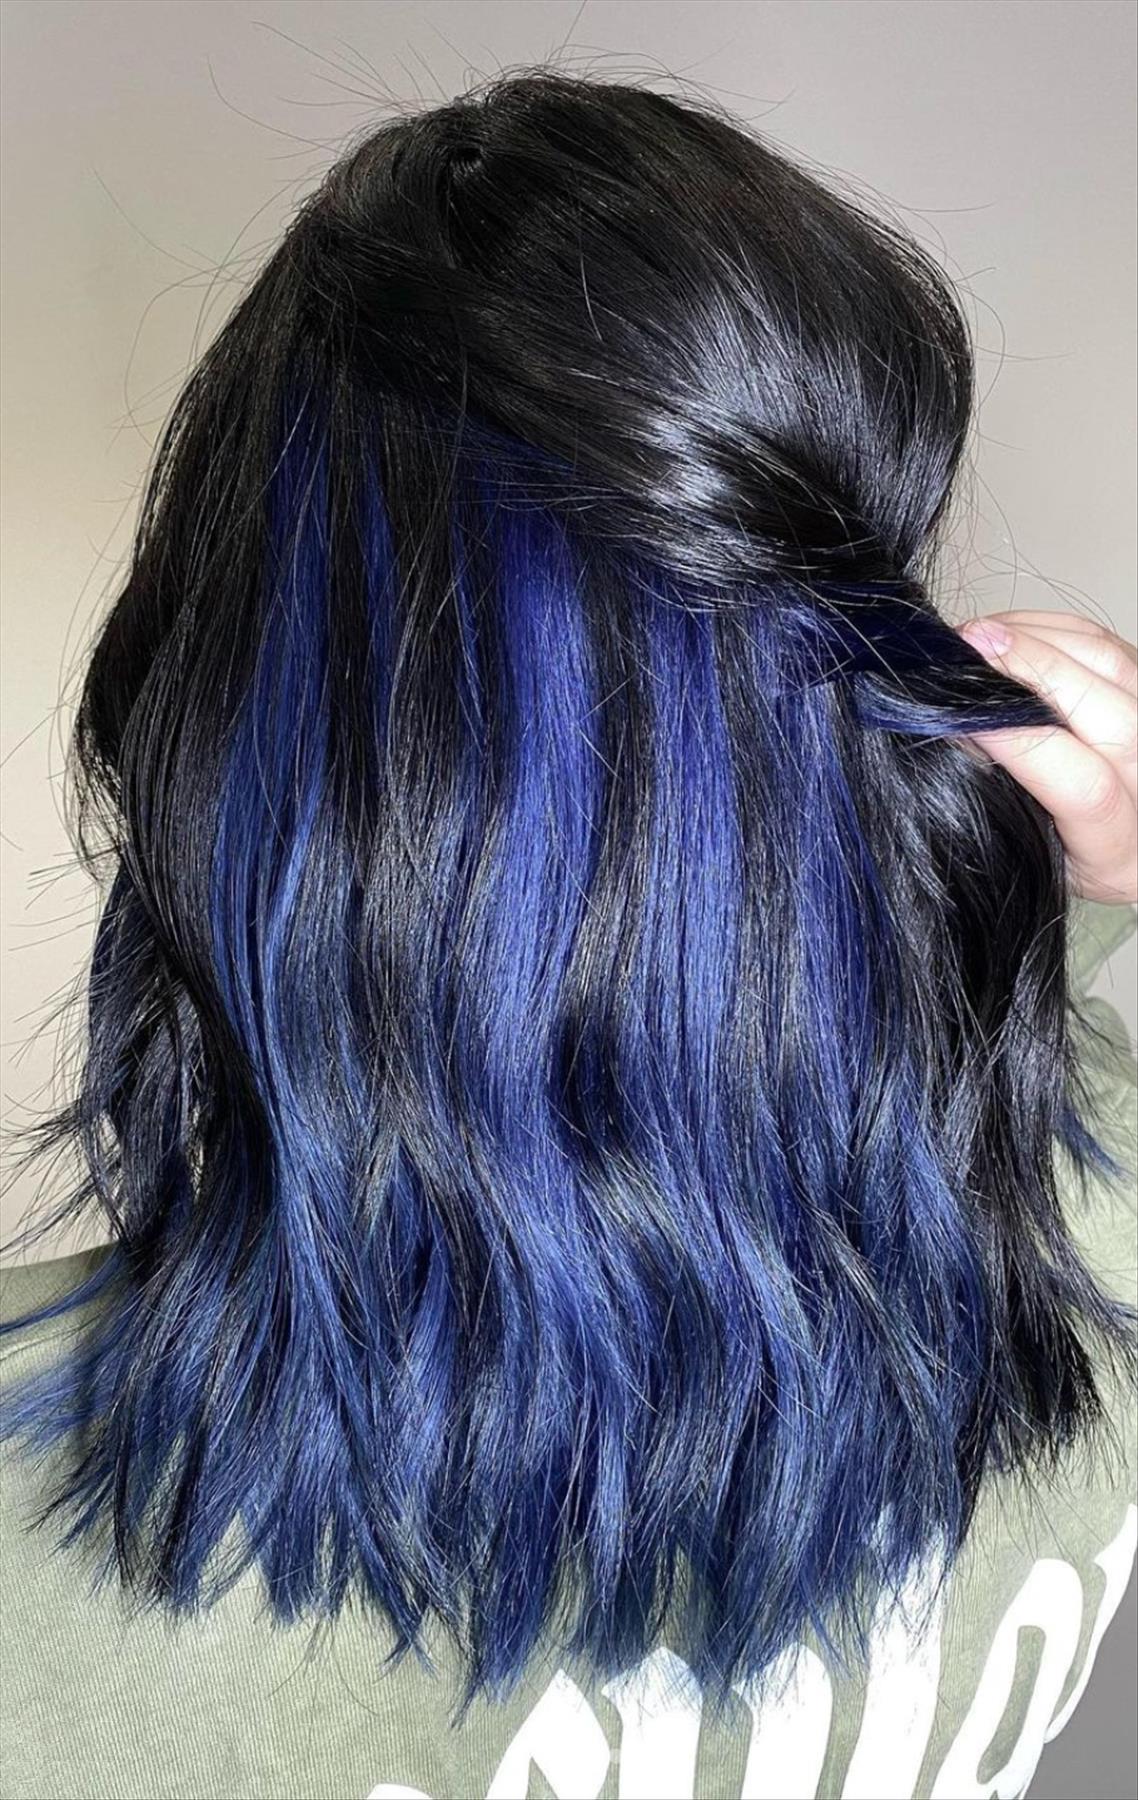 Stunning underneath hair color ideas for cool girls